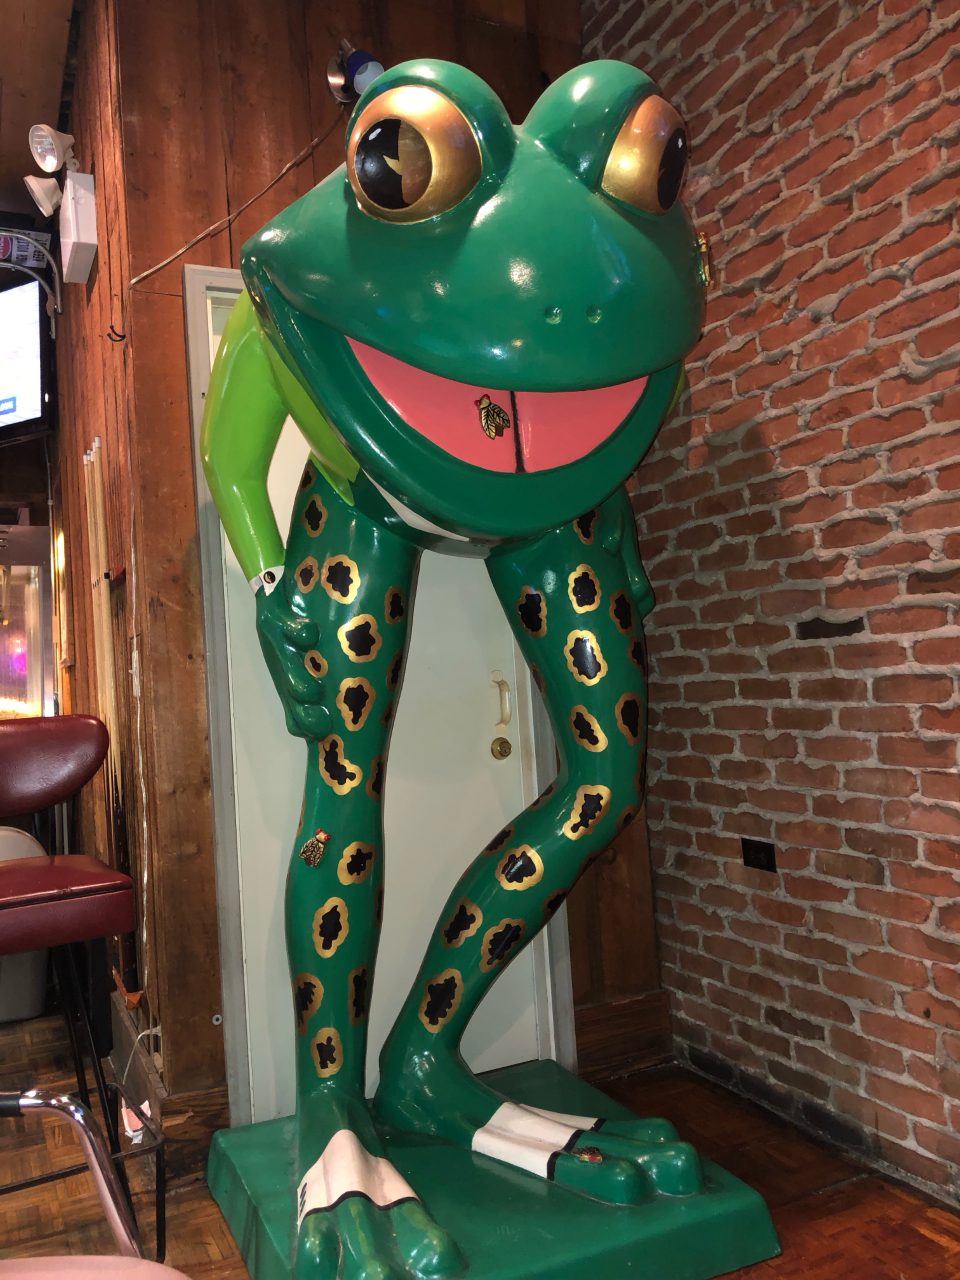 Anything except extinct: The story of Erie’s fish and frogs